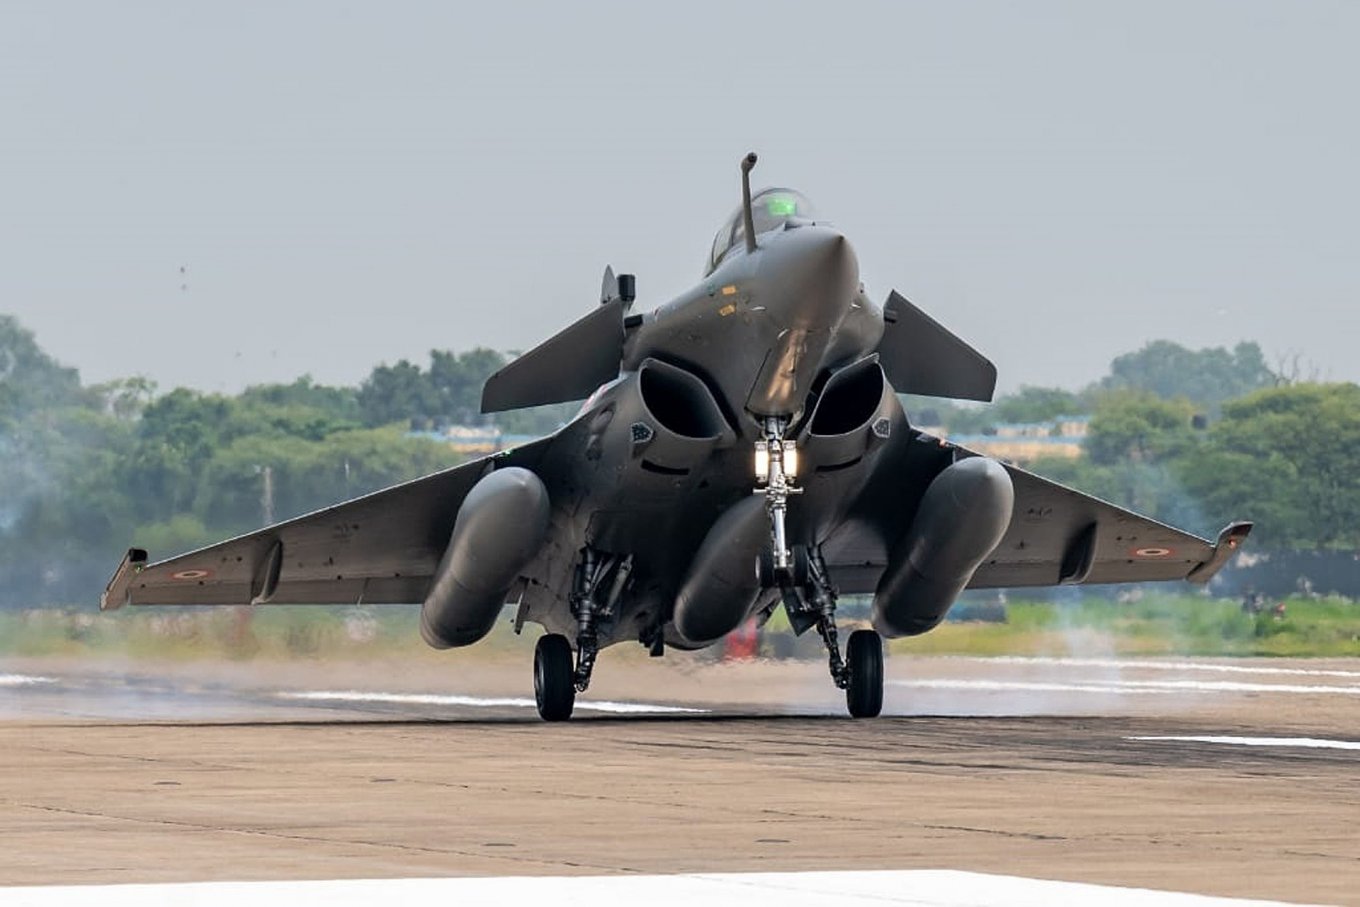 A Rafale landing at Ambala Air Force Station on its first arrival in India on 29 July 2020